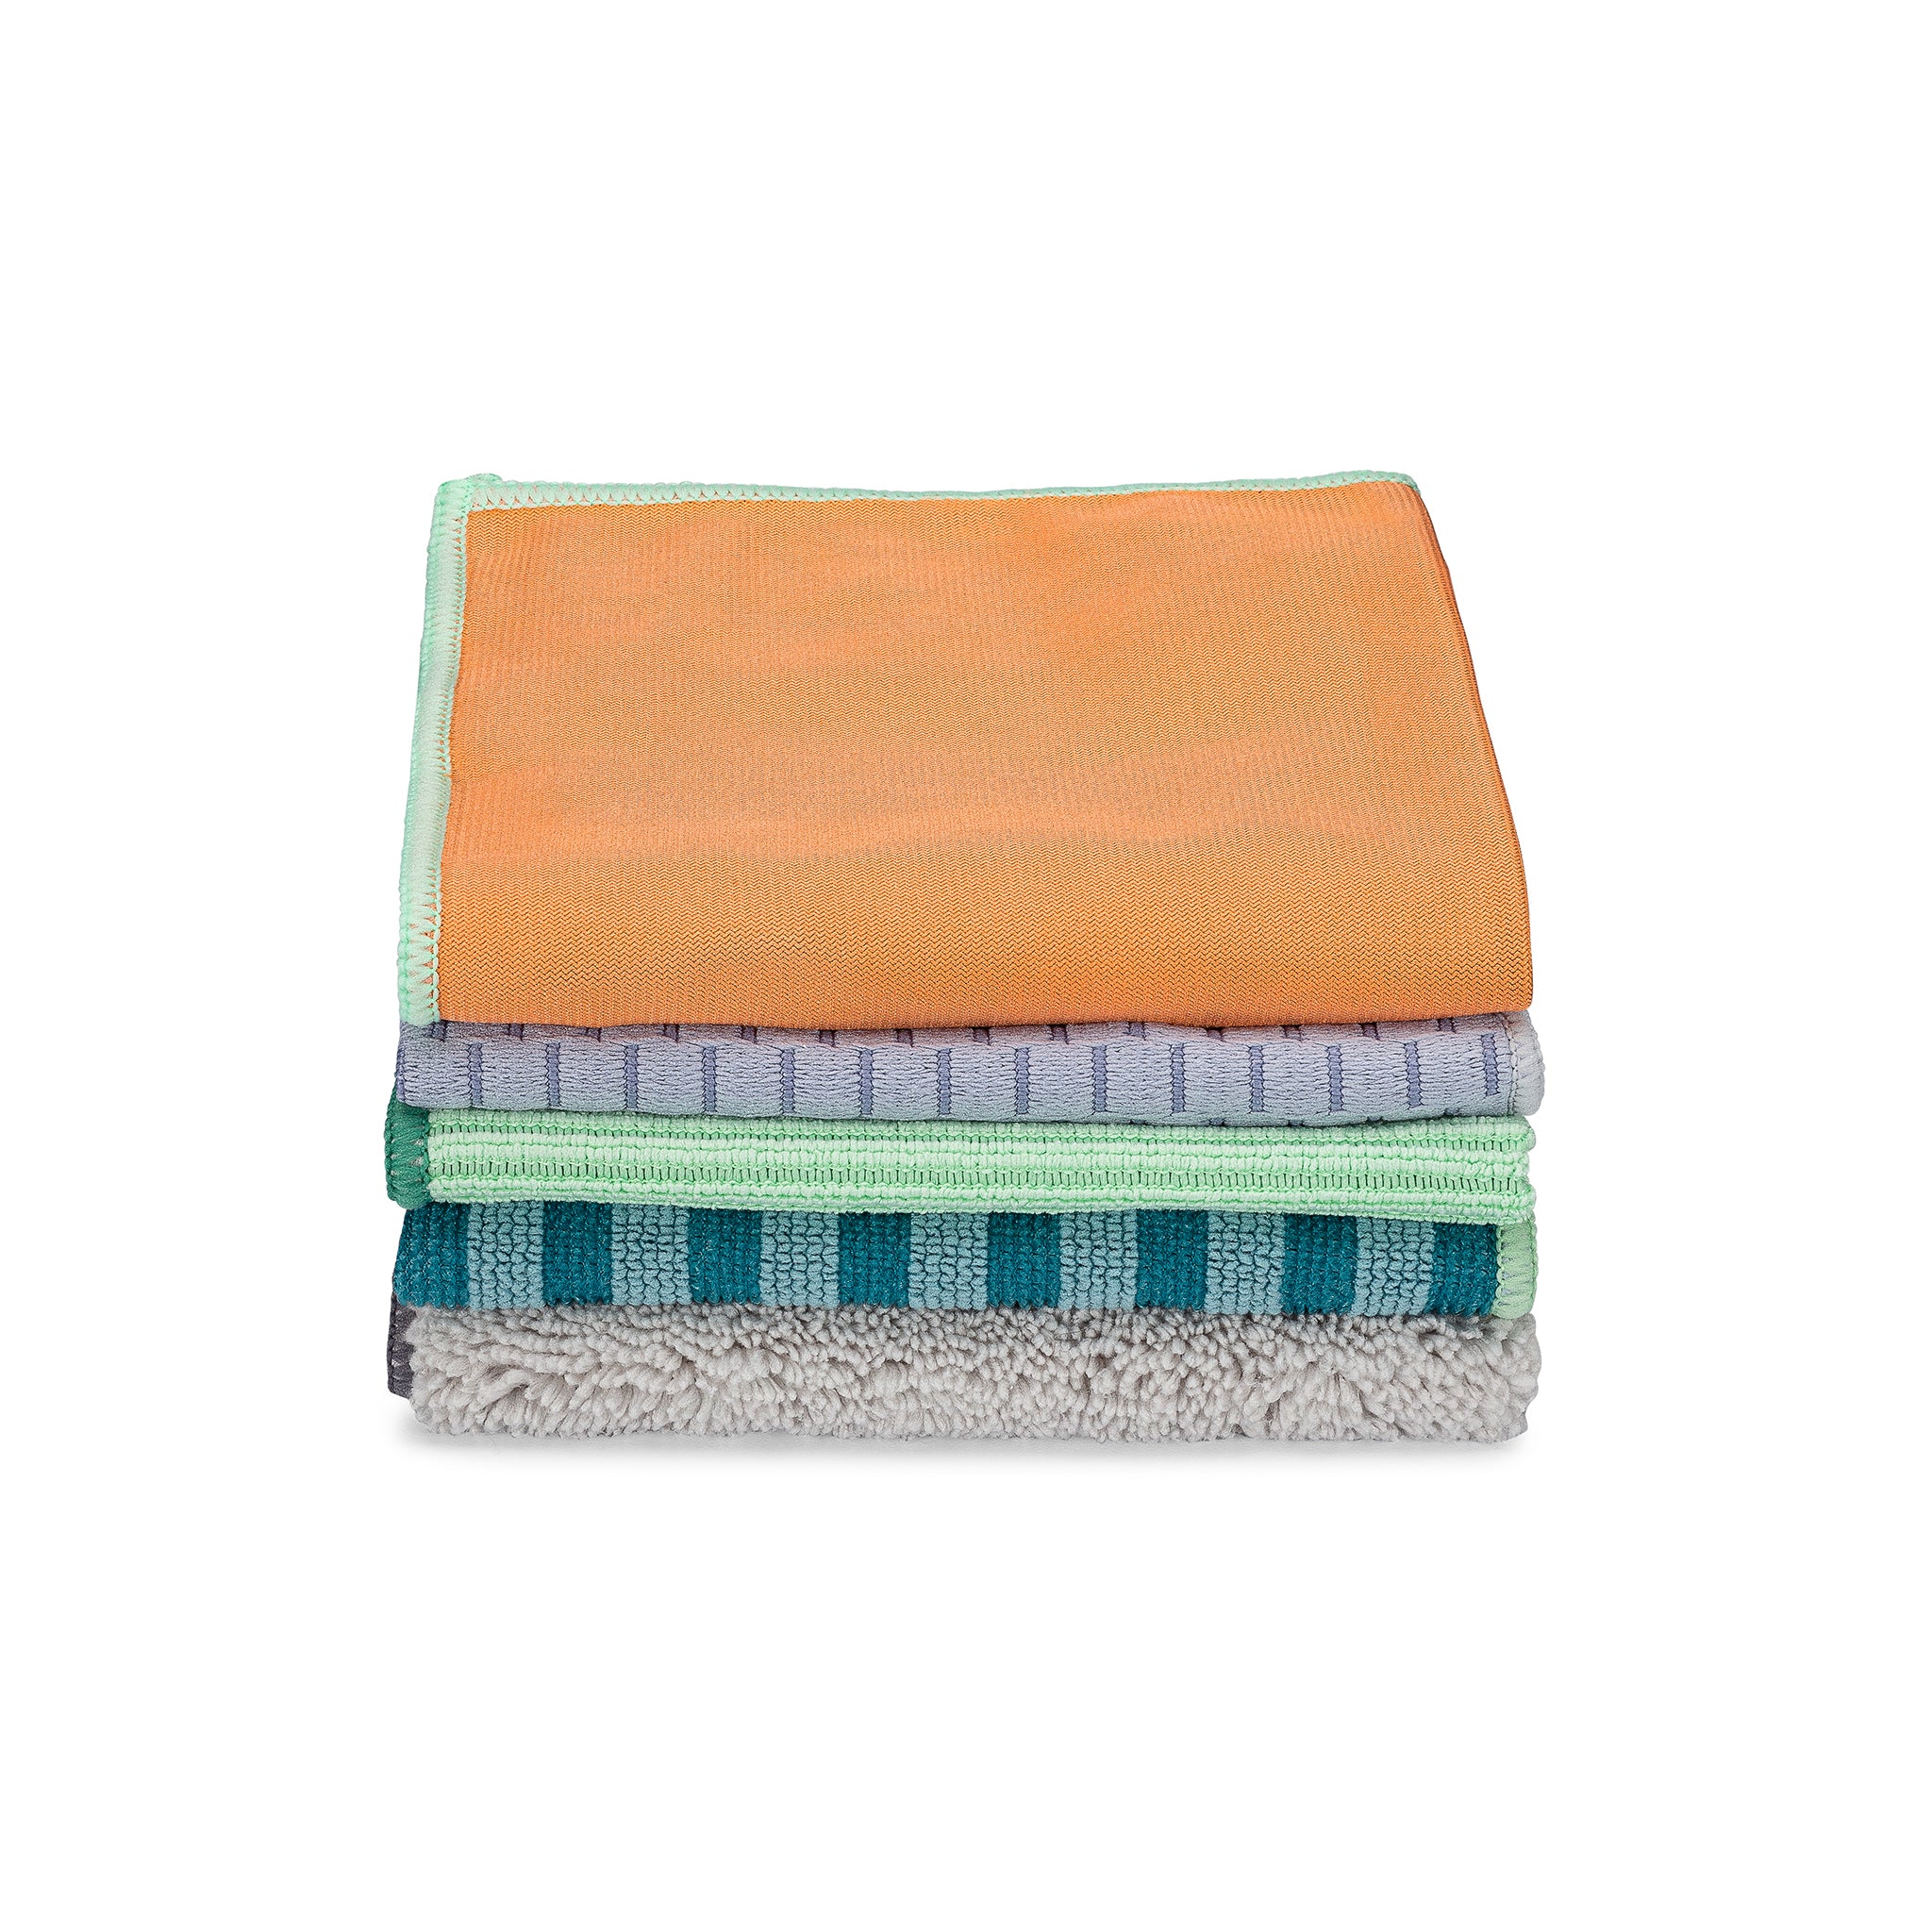 Revolution Skincare Recycled & Reusable Microfibre Cleansing Cloths